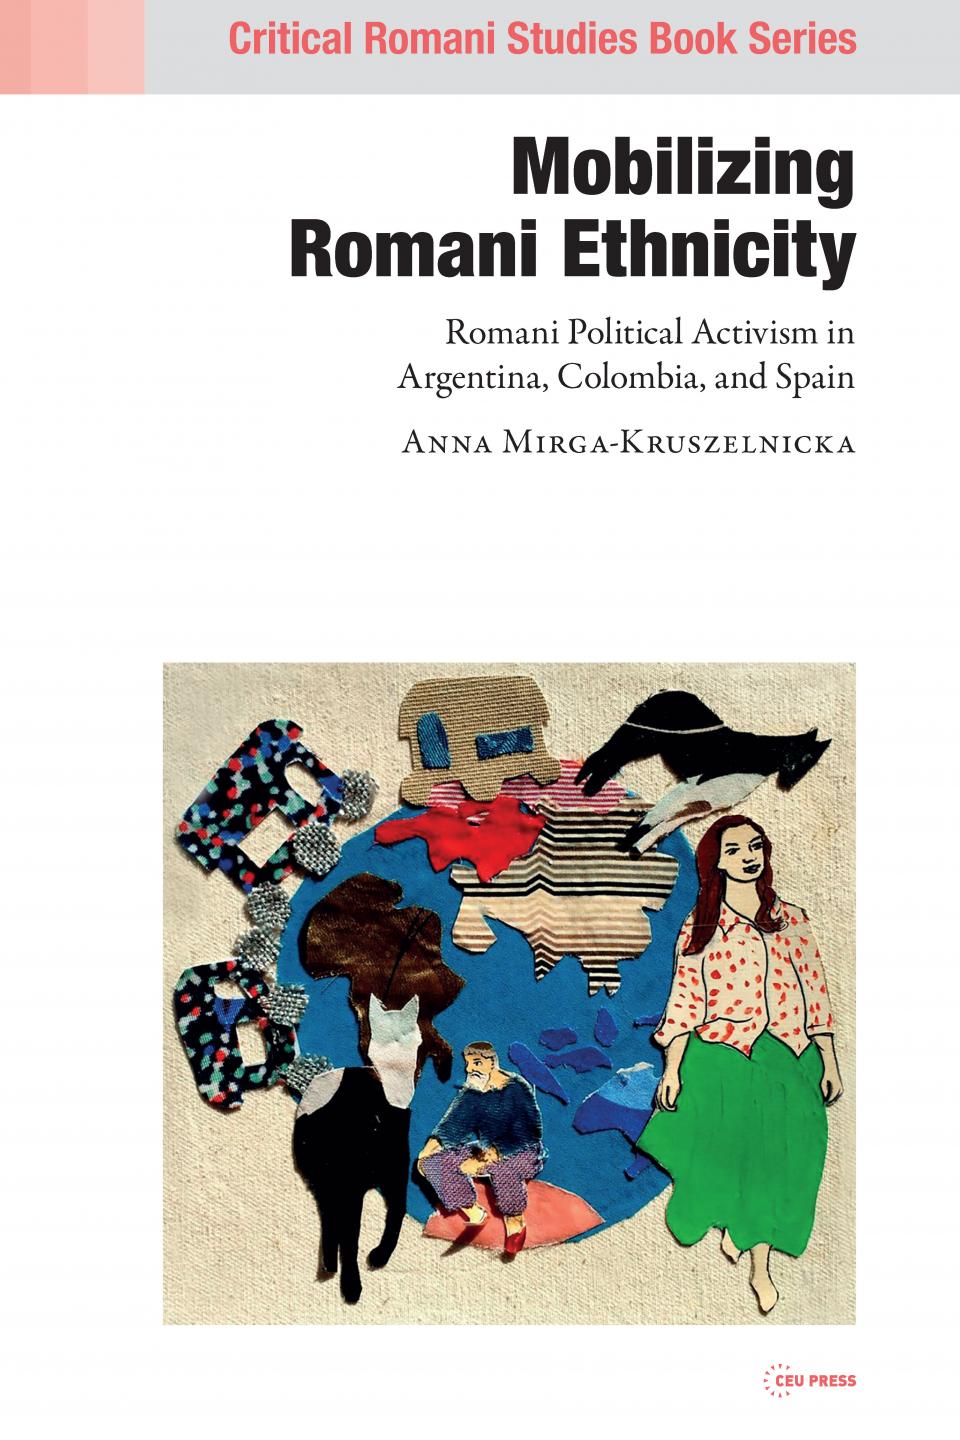 Book cover of Anna Mirga-Kruszelnicka: Mobilizing Romani Ethnicity. Romani Political Activism in Argentinia, Colombia, and Spain.